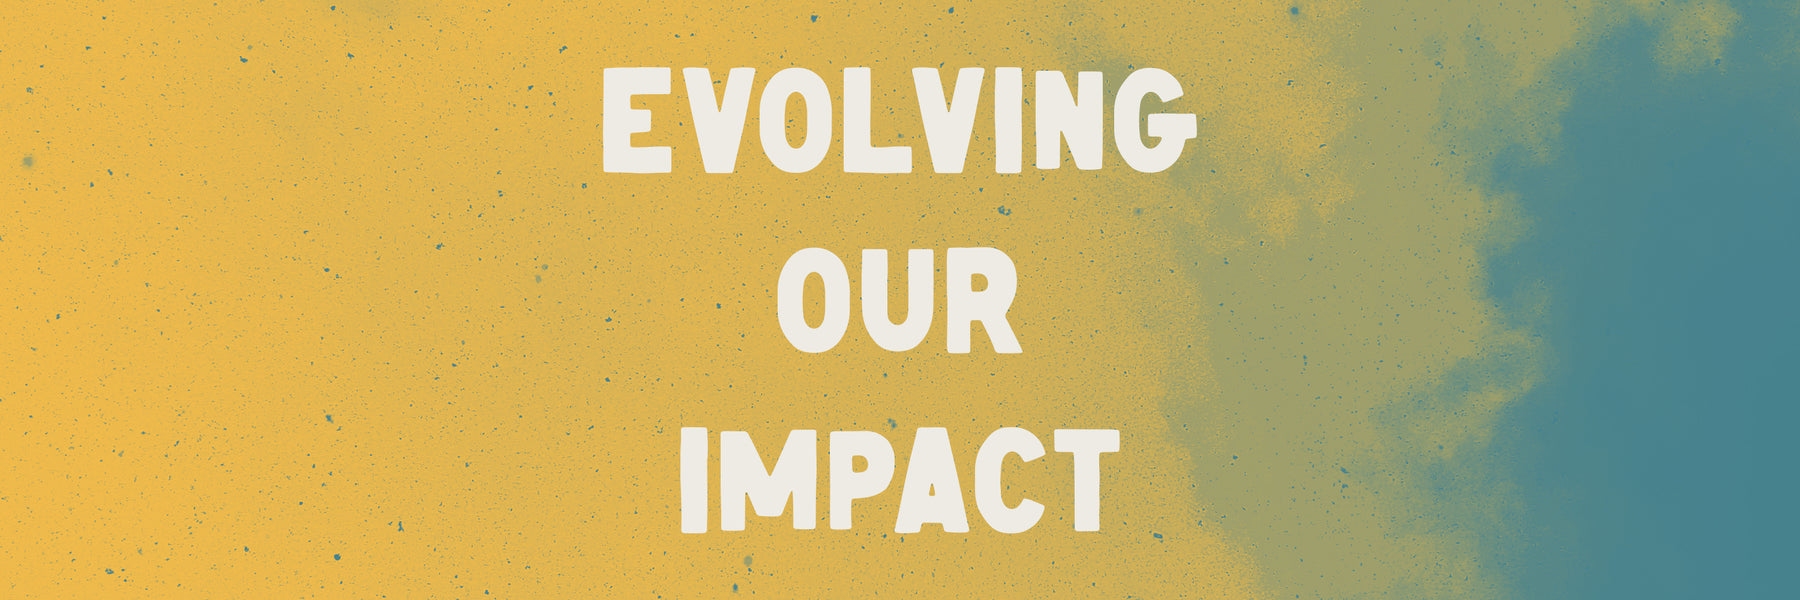 Evolving Our Impact - 50% of Profits Donated